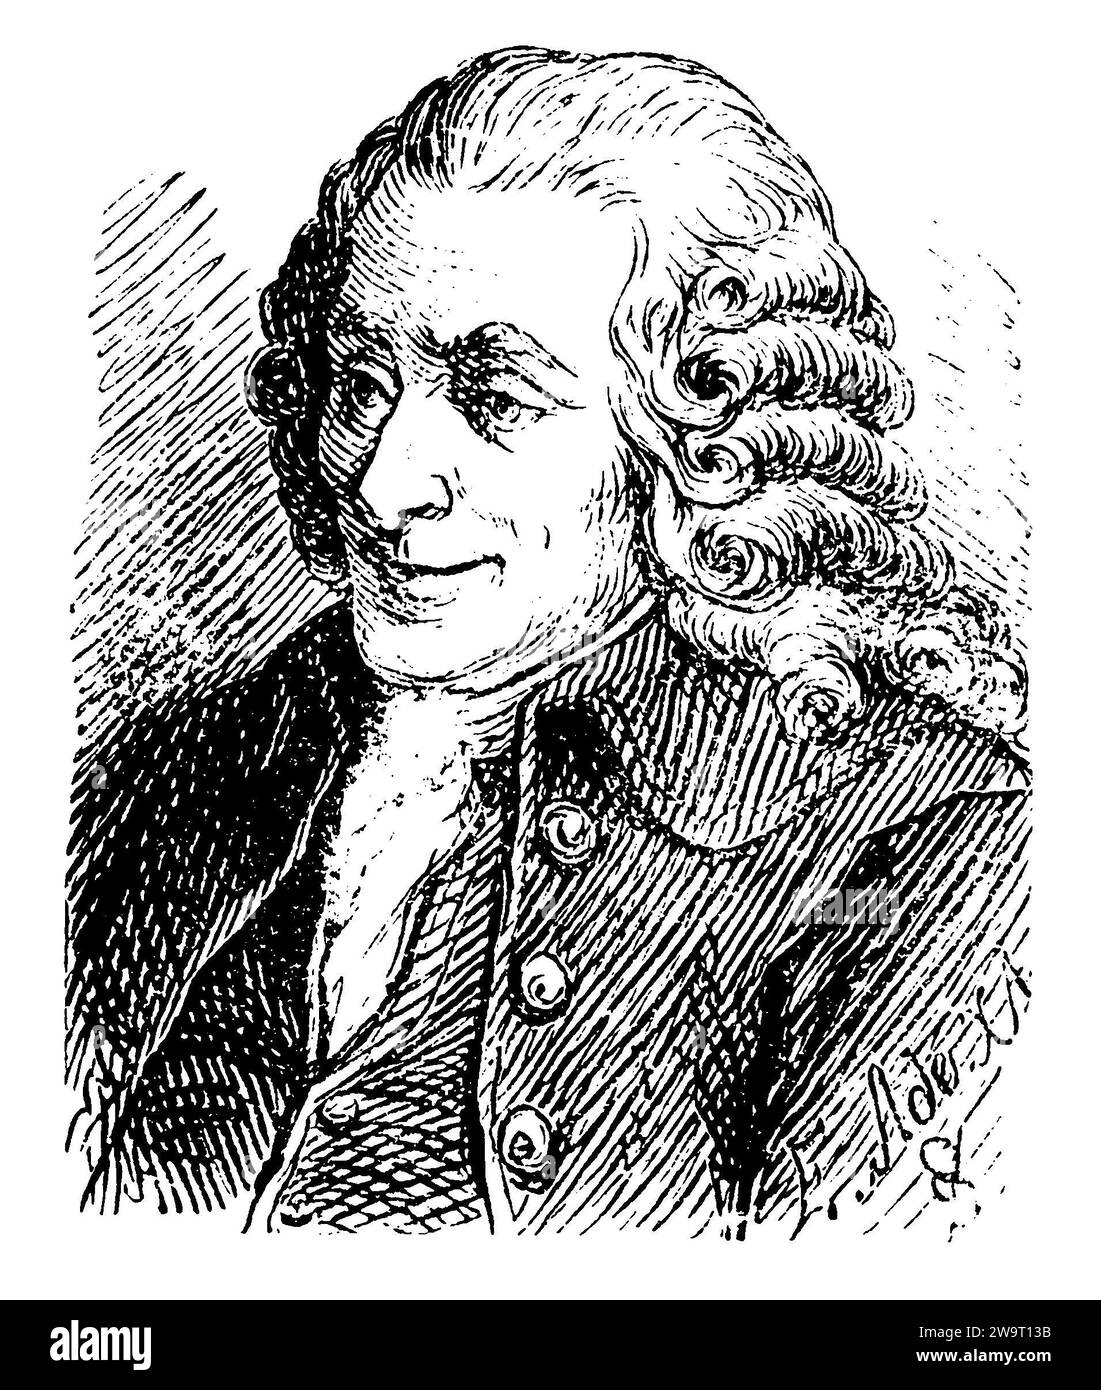 Voltaire (1694-1778), French writer, dramatist, philosopher and historian, ,  (picture book, 1881), Voltaire (1694-1778), französischer Schriftsteller, Dramatiker, Philosoph und Historiker, Voltaire (1694-1778), écrivain, dramaturge, philosophe et historien français Stock Photo